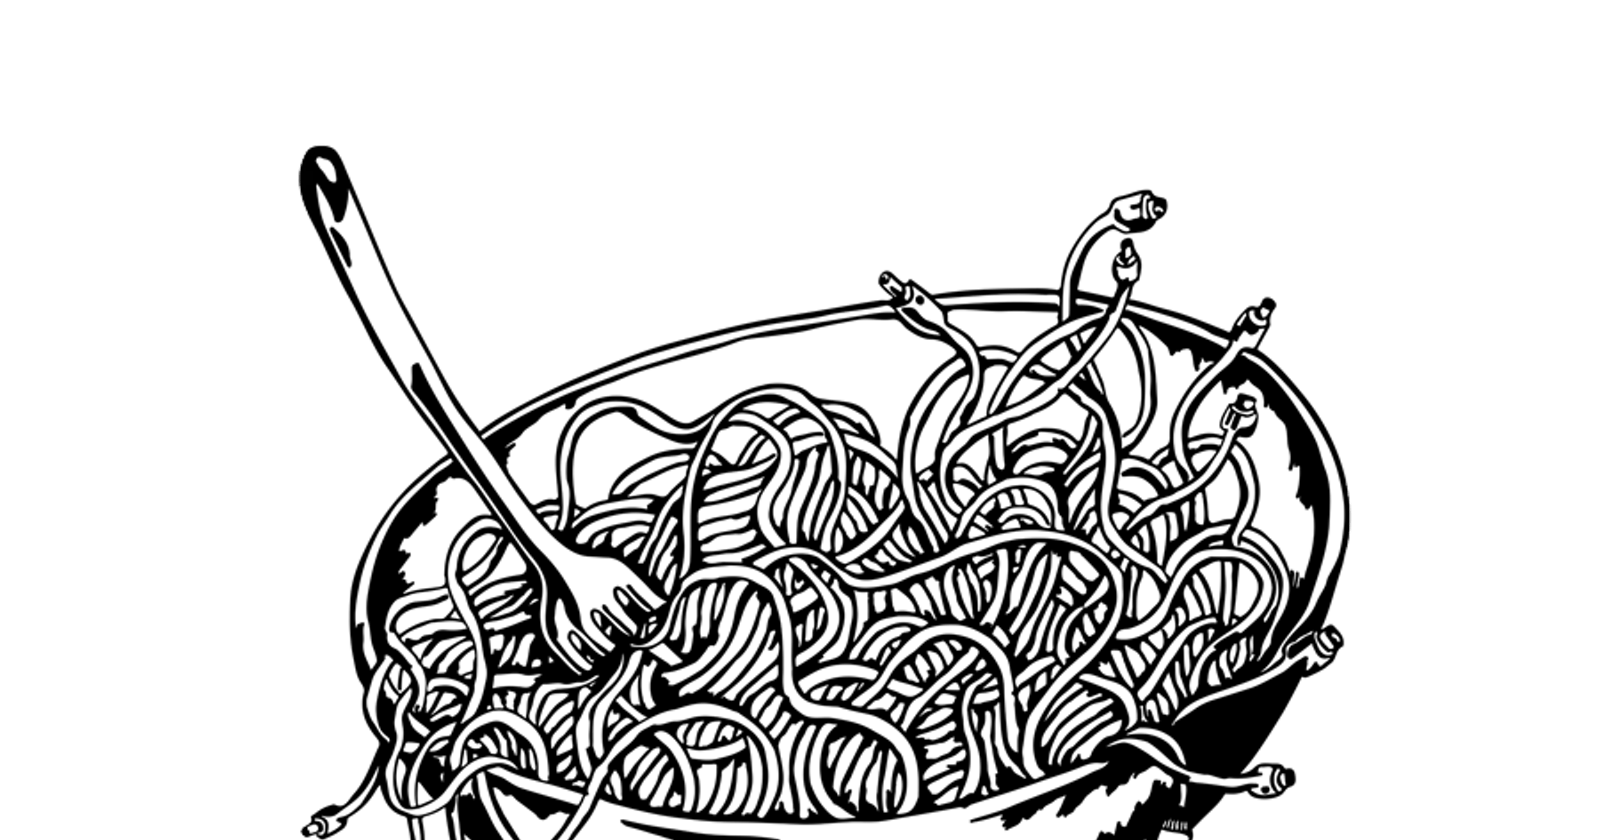 Software Engineering OOP principles and good practices to avoid spaghetti code